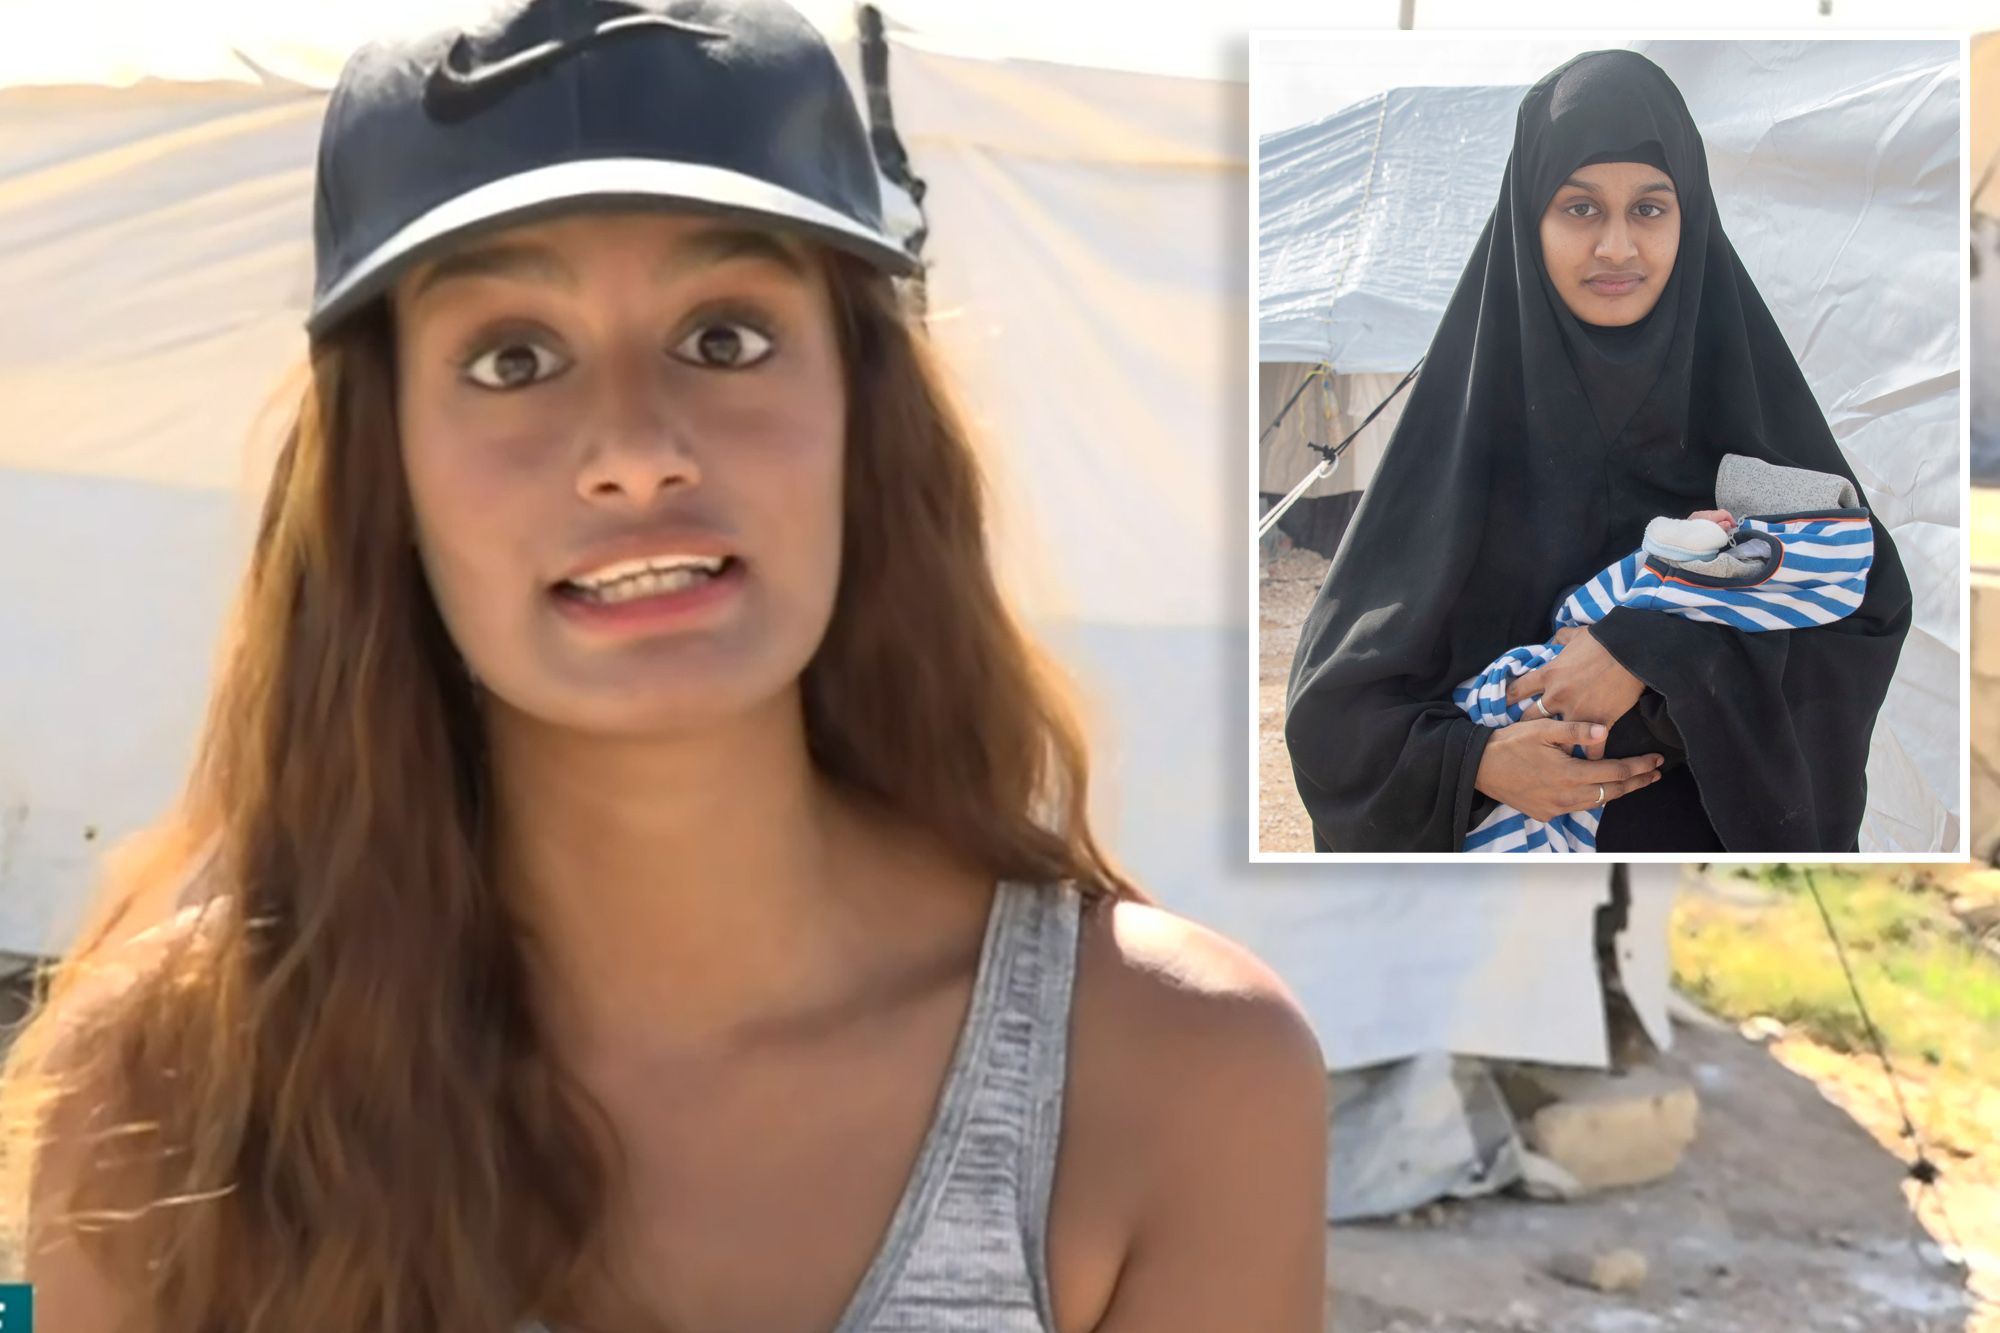 ISIS woman Shamina Begum wants to fight against terrorism